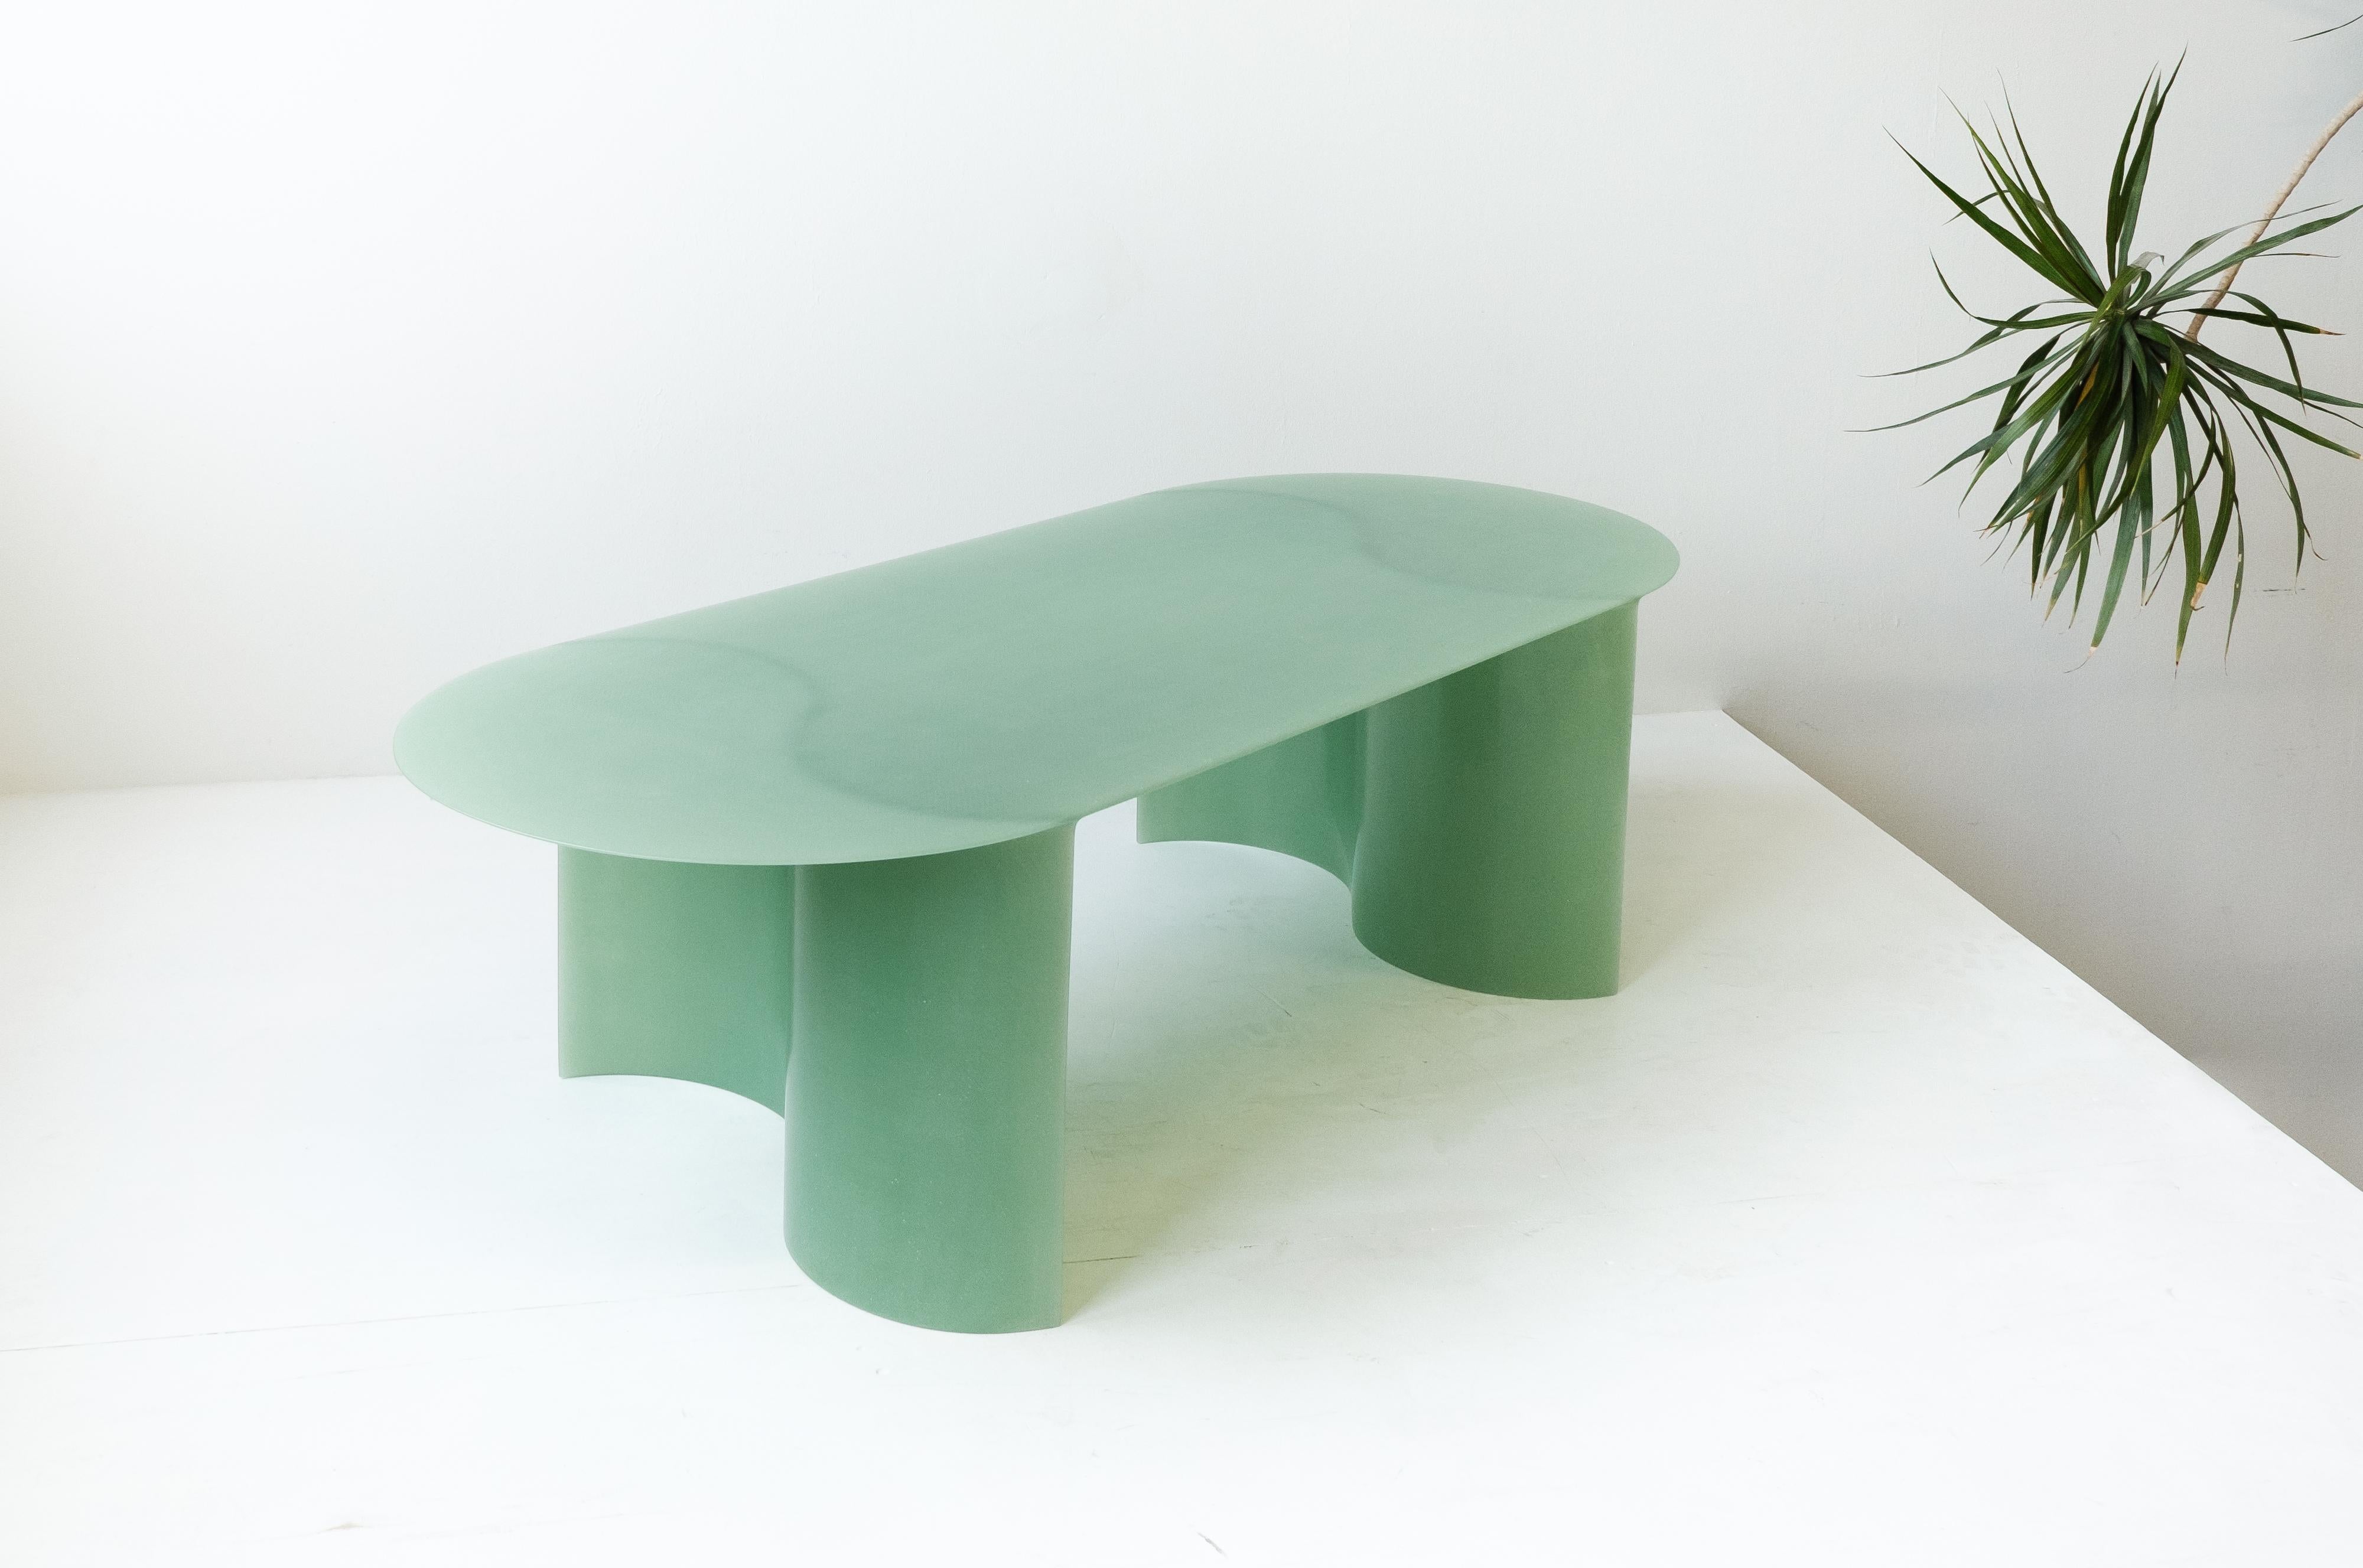 Contemporary Green Fiberglass, New Wave Coffee Table Big, by Lukas Cober 1